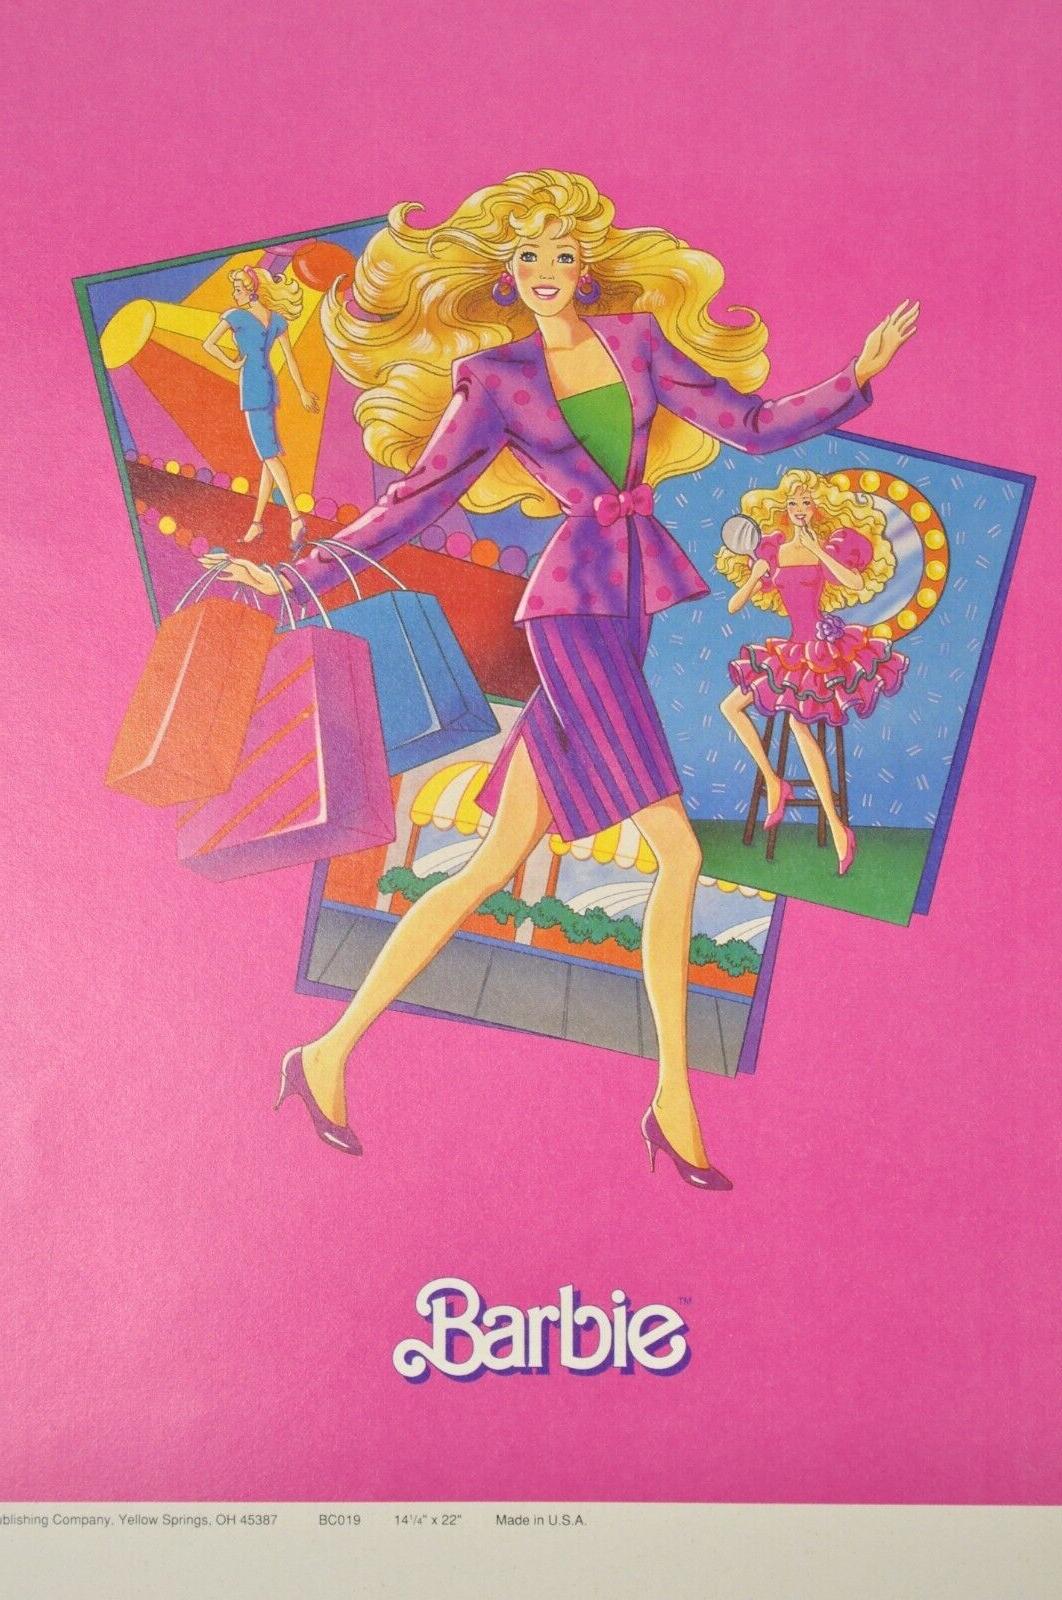 Vintage 1989 Barbie Mattel Original Pink Paper Book Covers NOS - Many Available For Sale 5